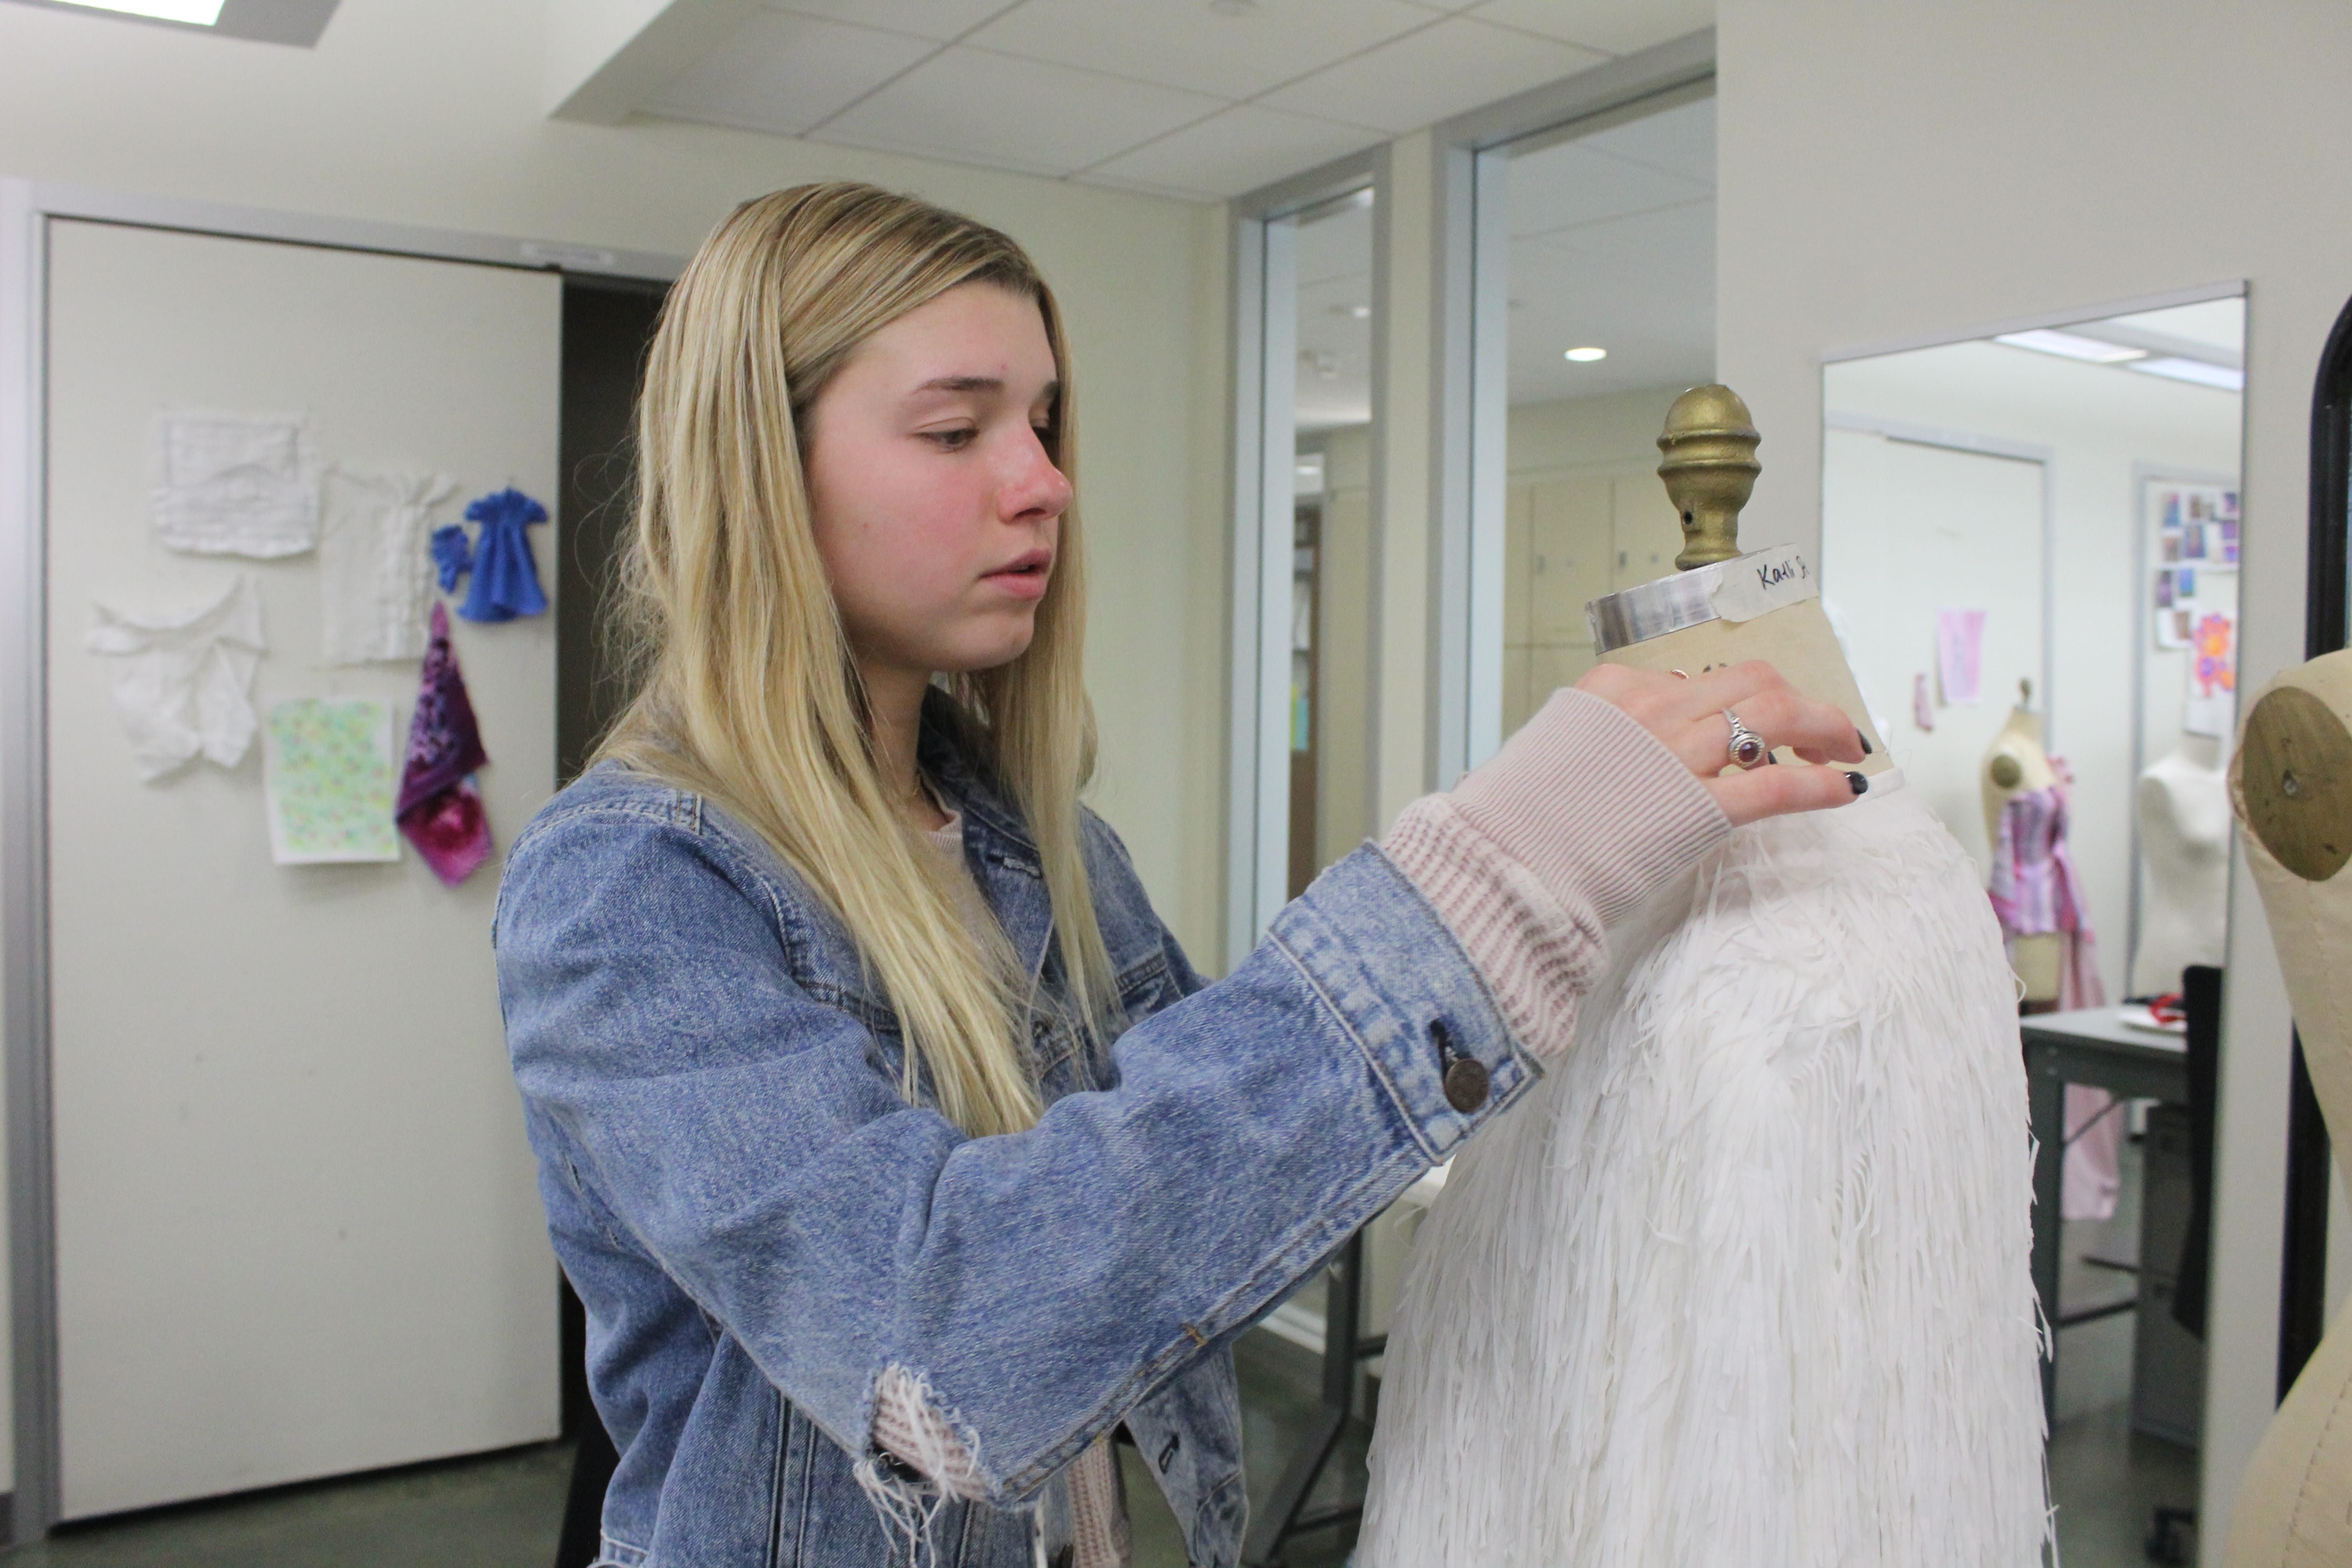 Erin Schaut, a fashion student at UW-Madison, pins up a white jacket she created onto a mannequin.